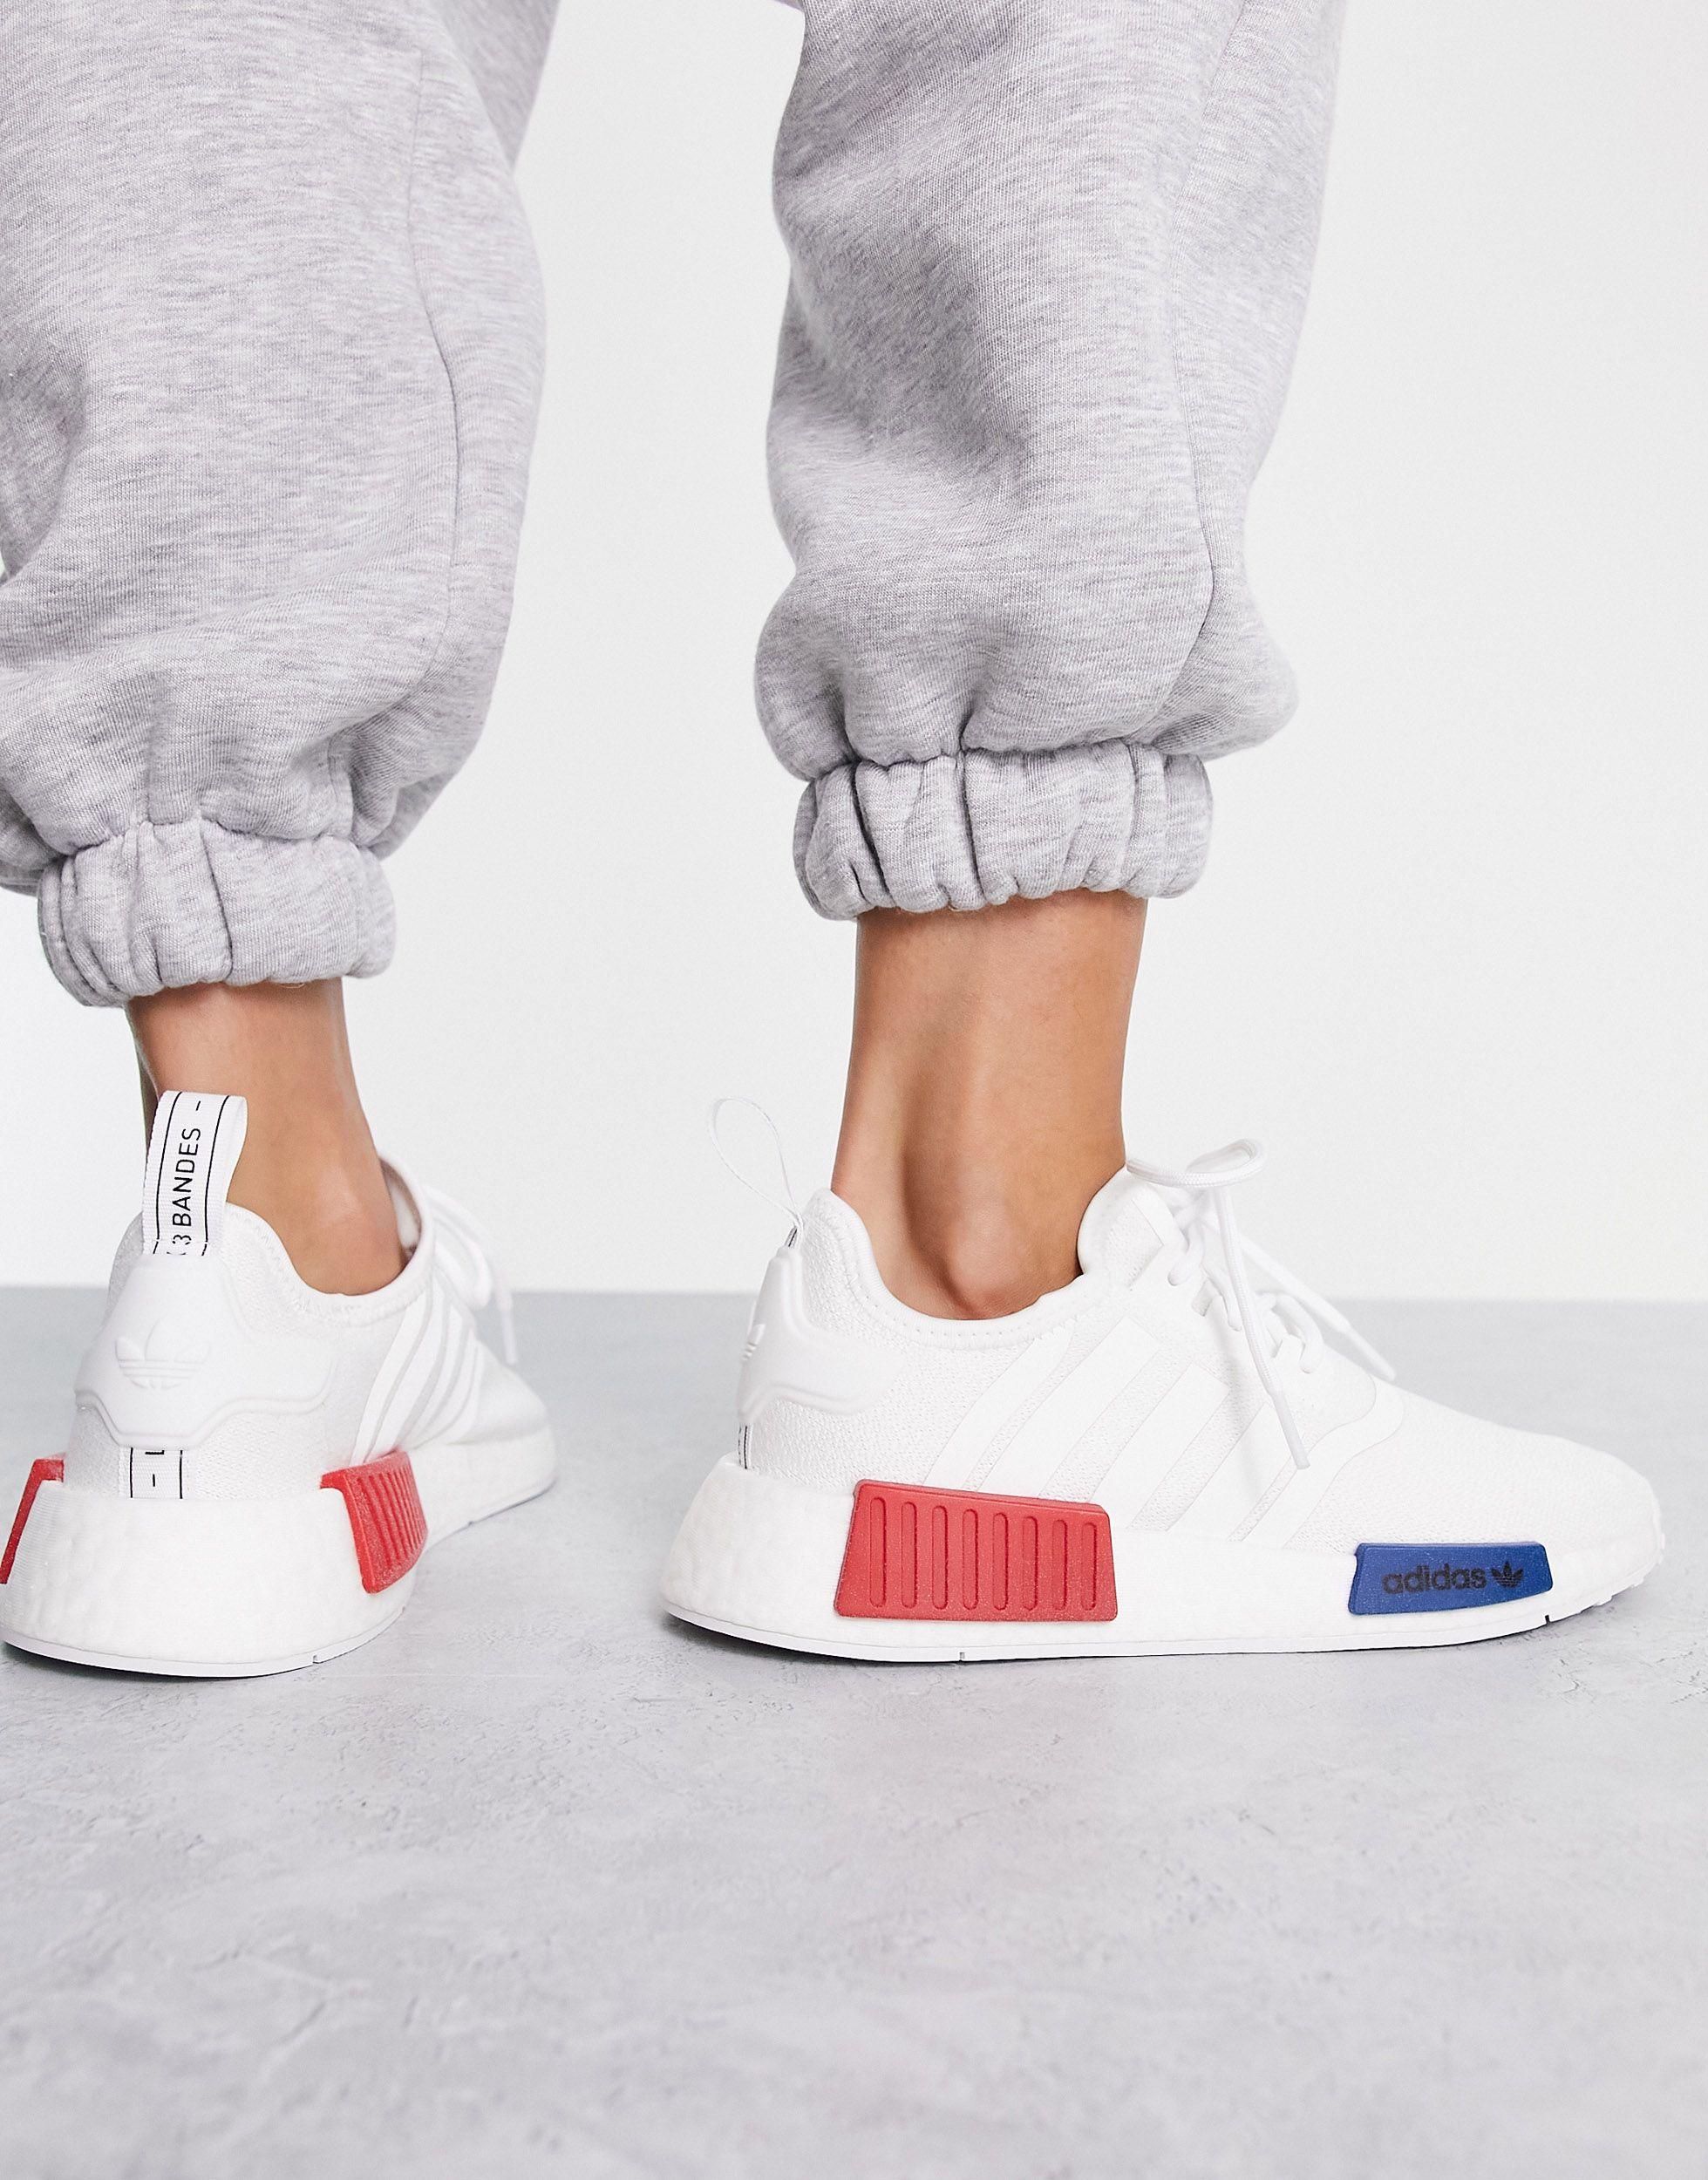 adidas Originals Rubber Nmd R1 Trainers in White | Lyst UK